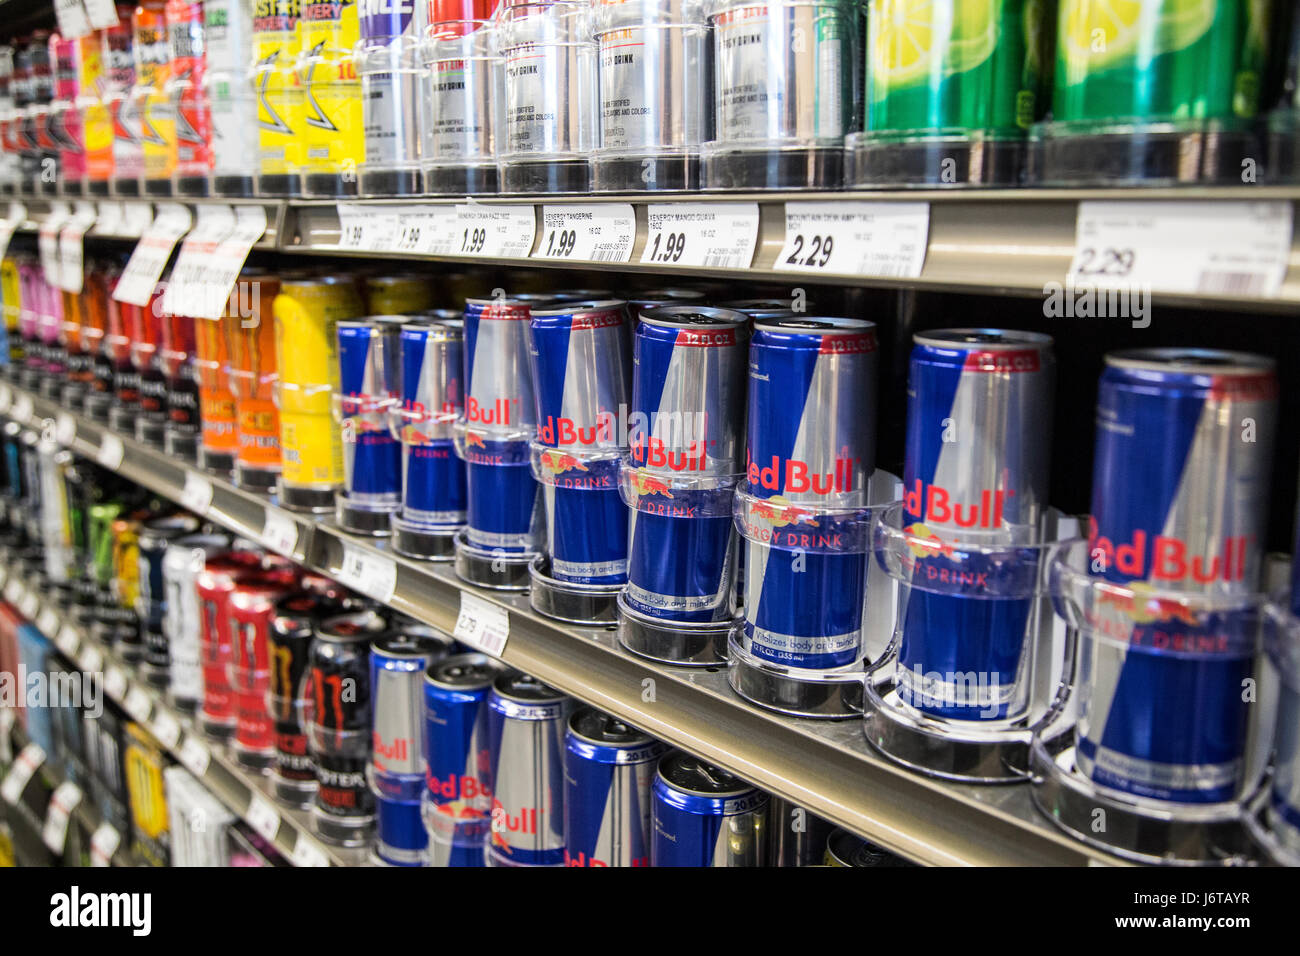 Cans of Red Bull Energy drink on the shelves of a grocery store Stock Photo  - Alamy